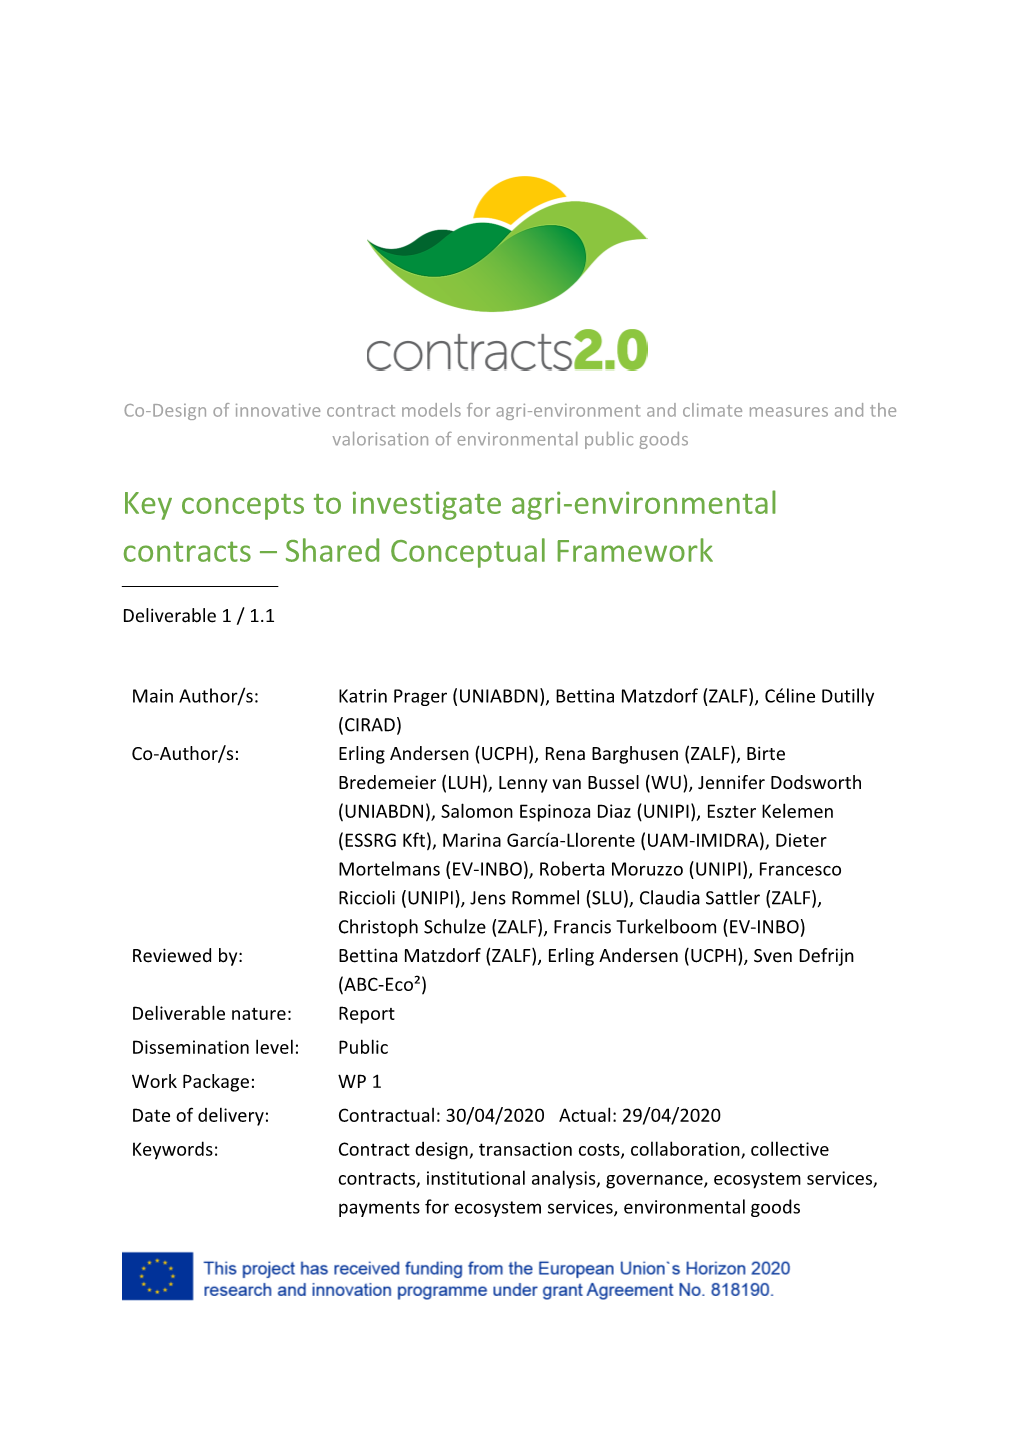 Key Concepts to Investigate Agri-Environmental Contracts – Shared Conceptual Framework